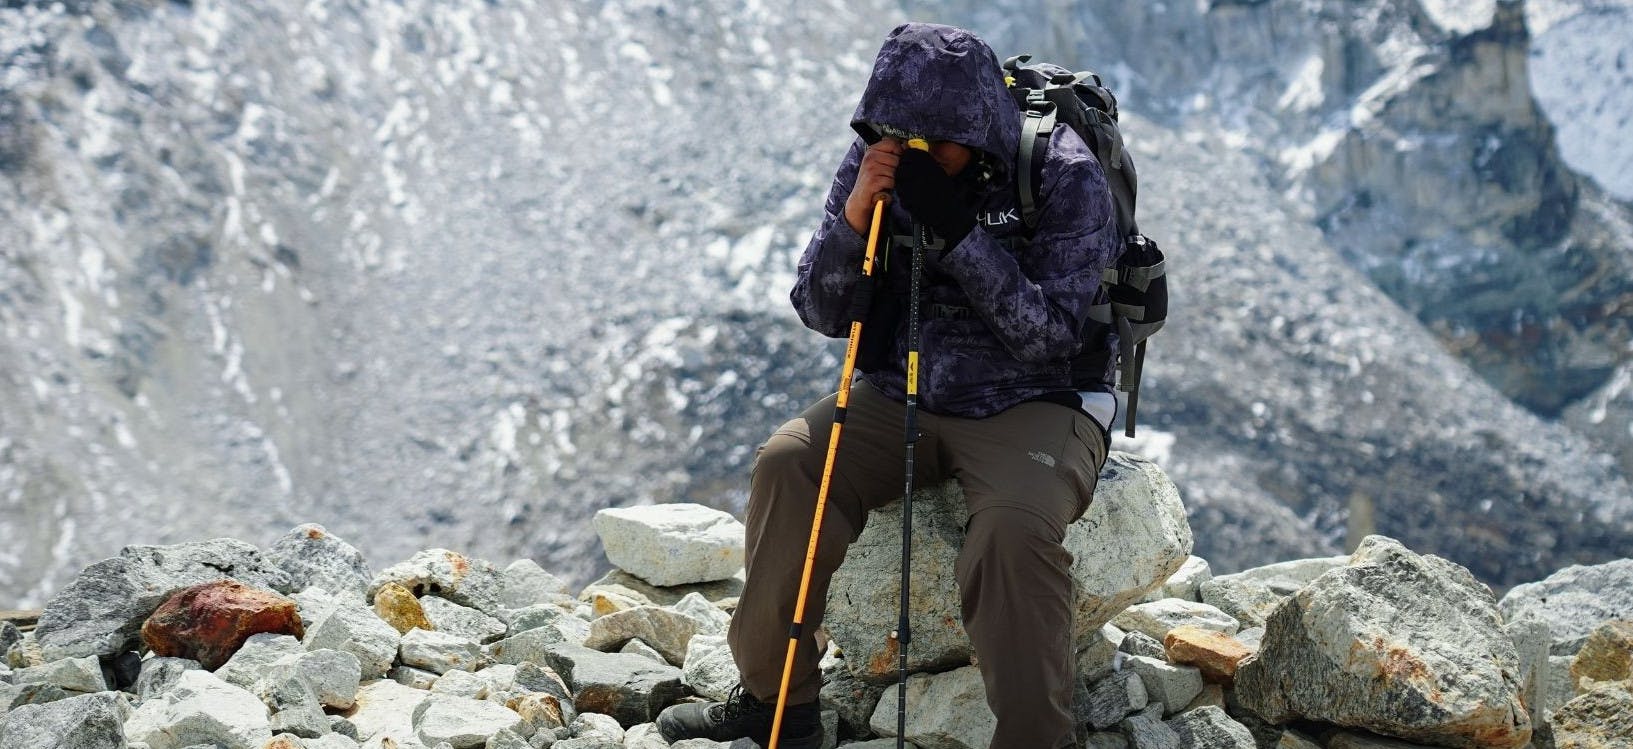 High Altitude Sickness Prevention Tips